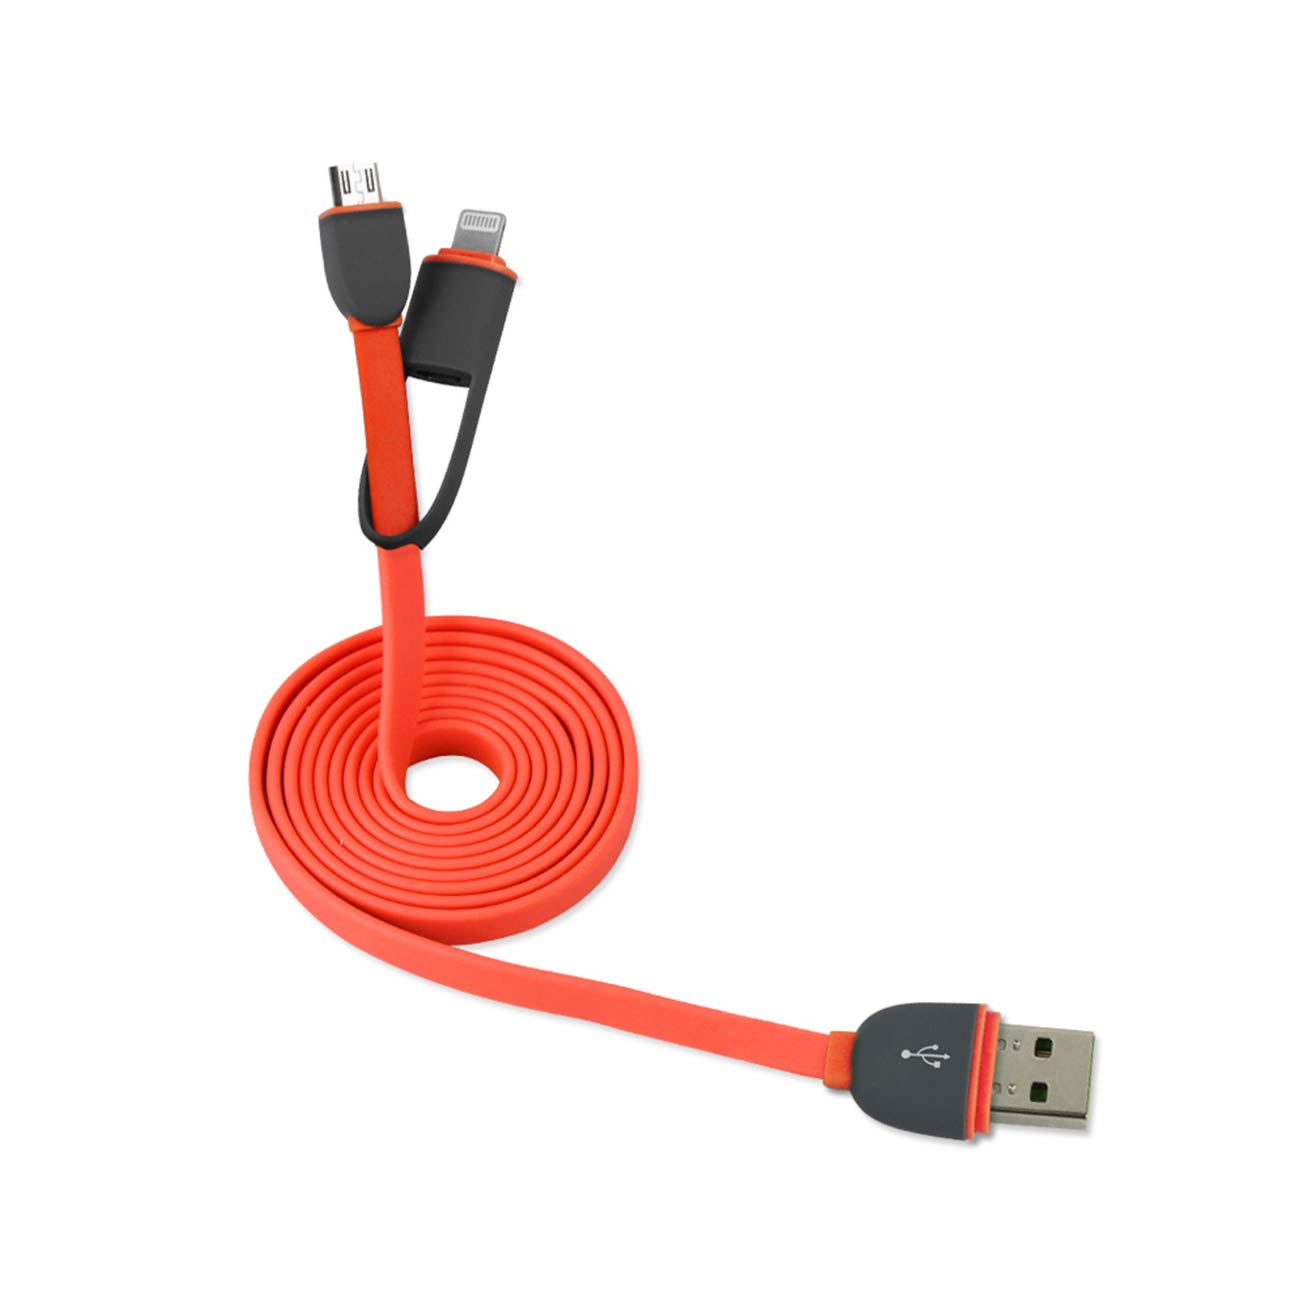 IPHONE 6 AND MICRO USB FLAT CABLE 3.2FT 2-IN-1 USB DATA IN CORAL RED